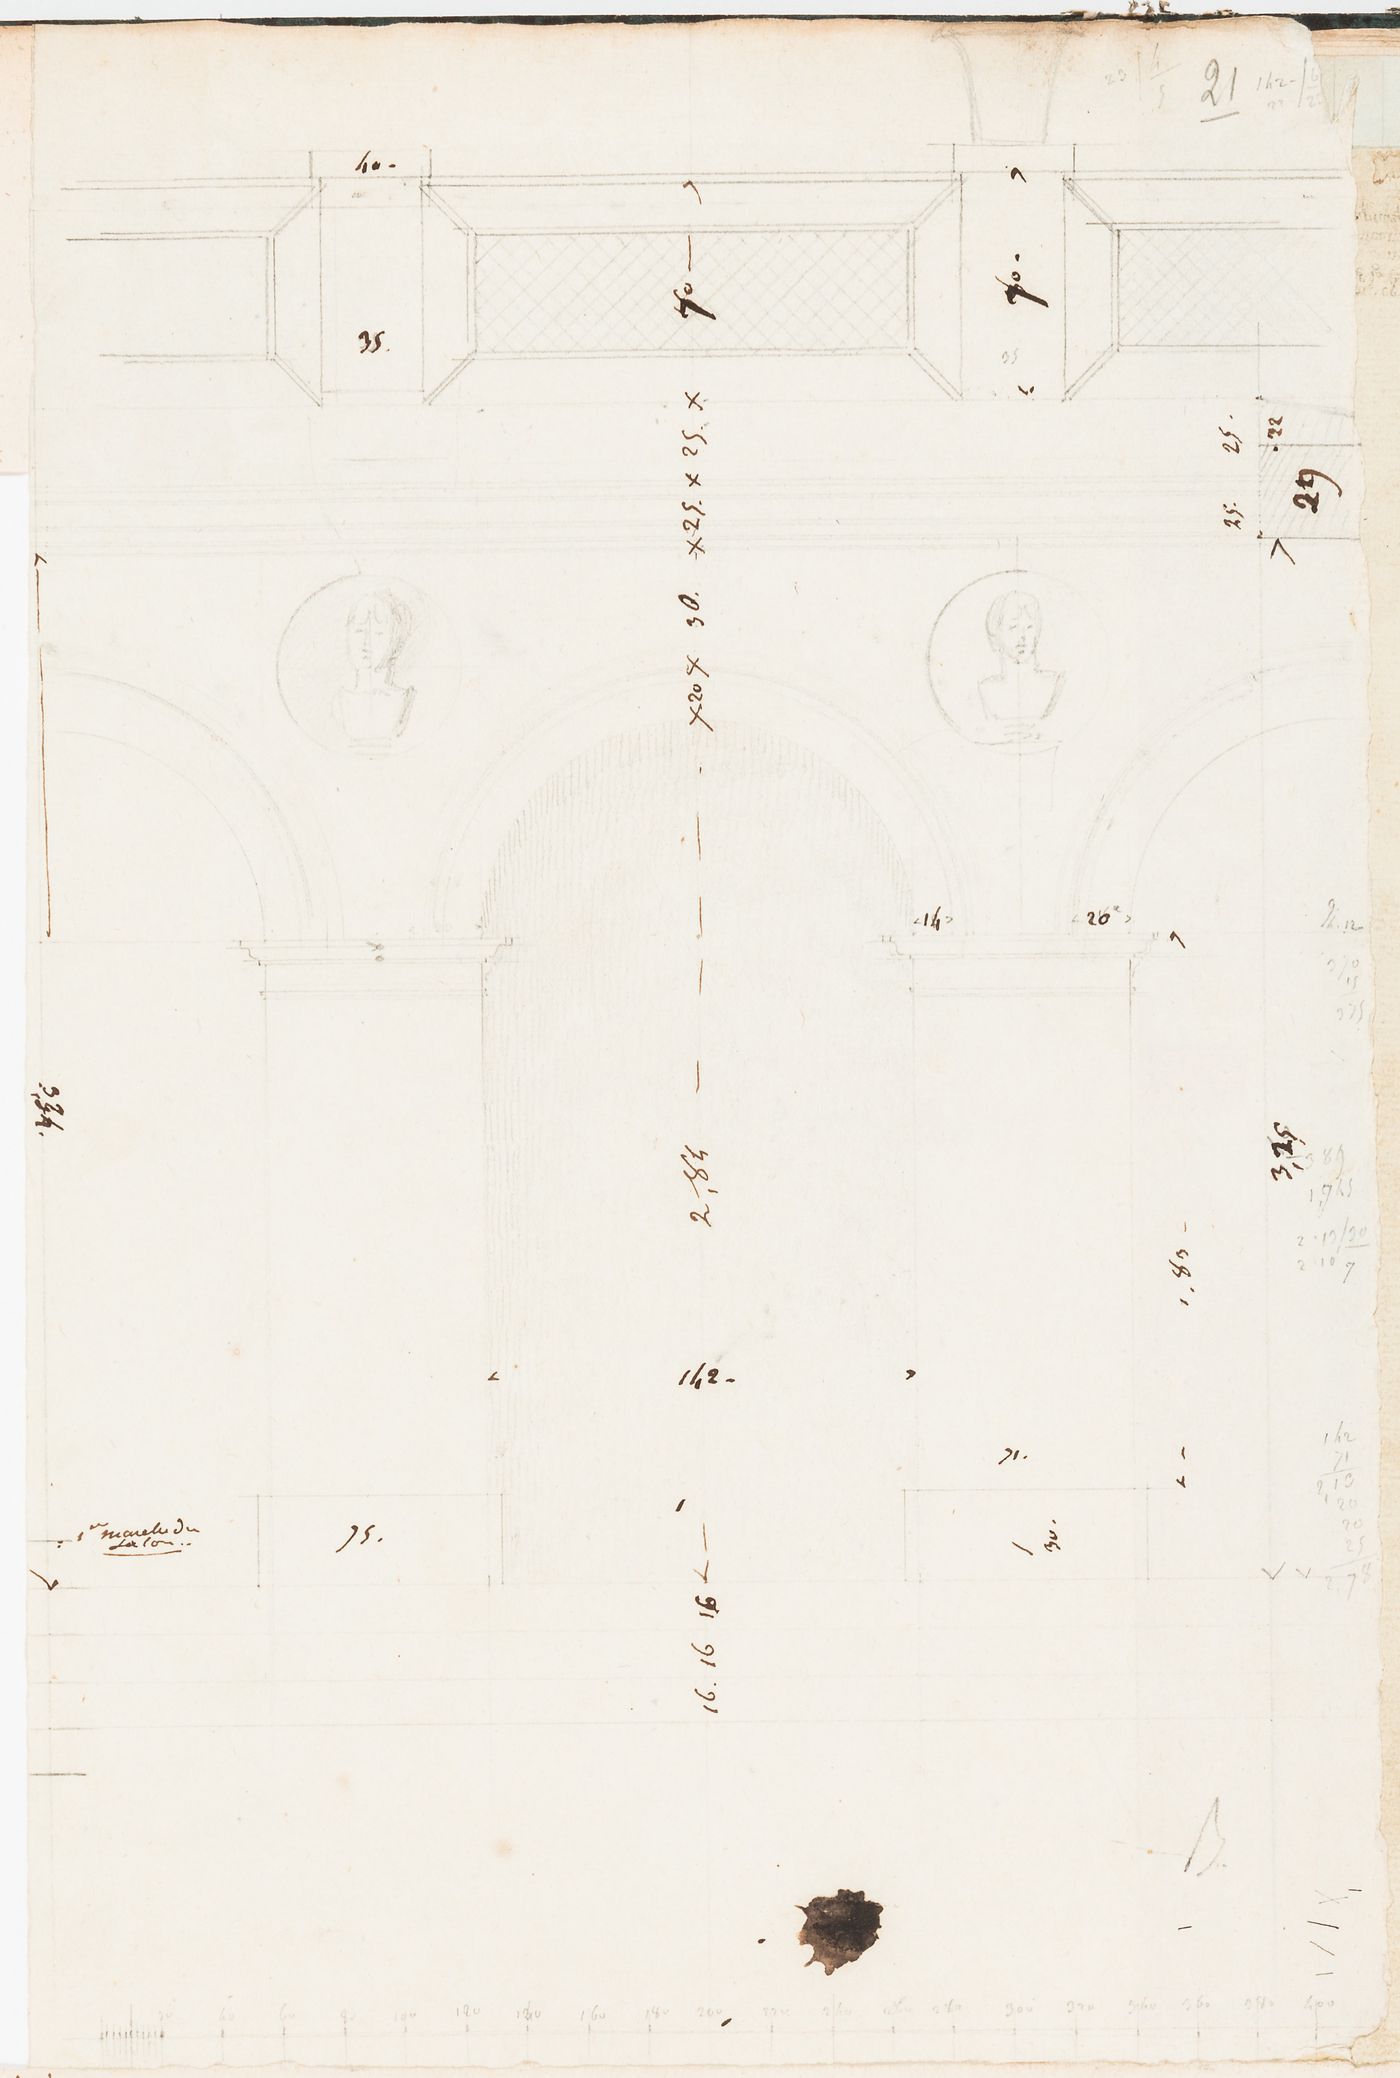 Project for the conversion of Hôtel Soyécourt, Paris, into barracks: Partial elevation and plan for an arcade